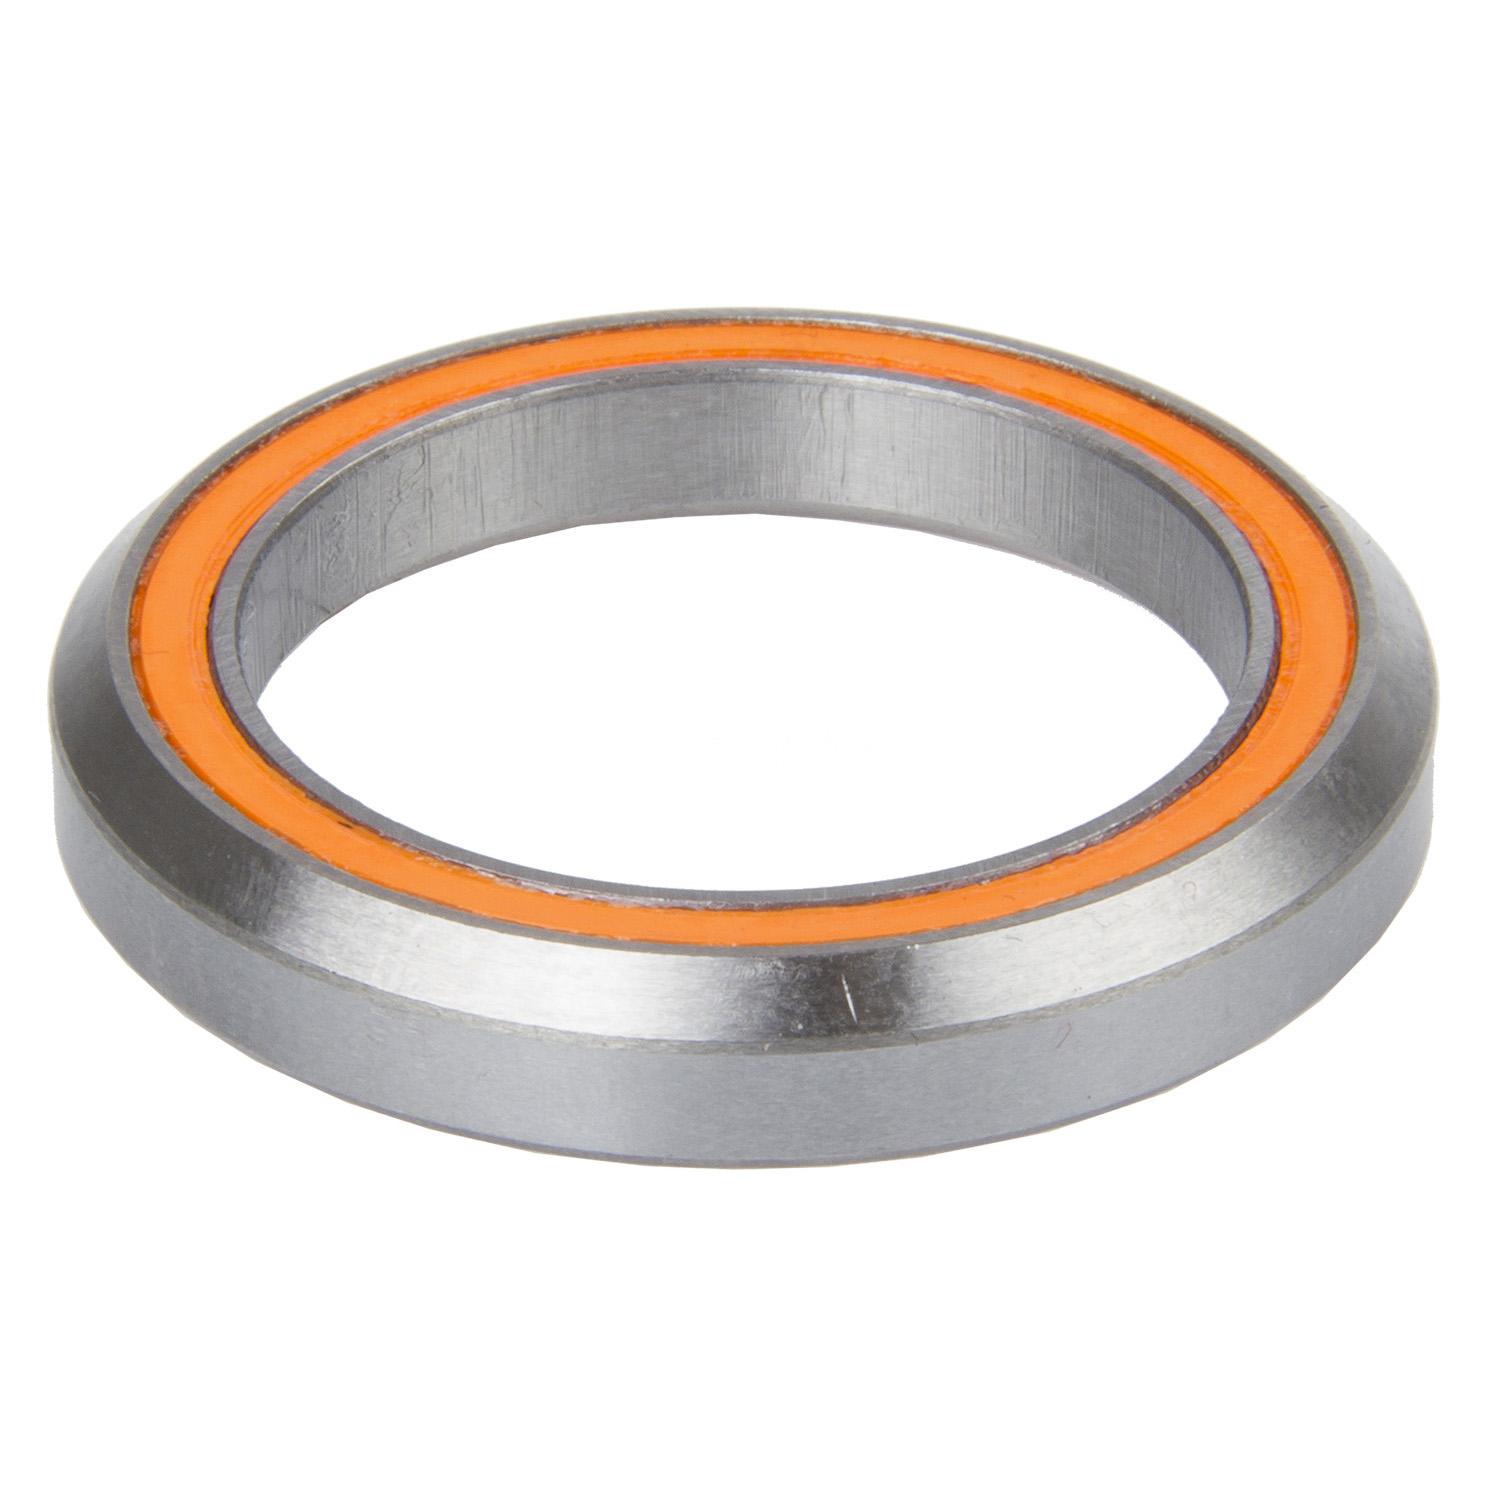 390772 – SI 1.125 ball bearing for head set – AVAILABLE IN SELECTED BIKE SHOPS